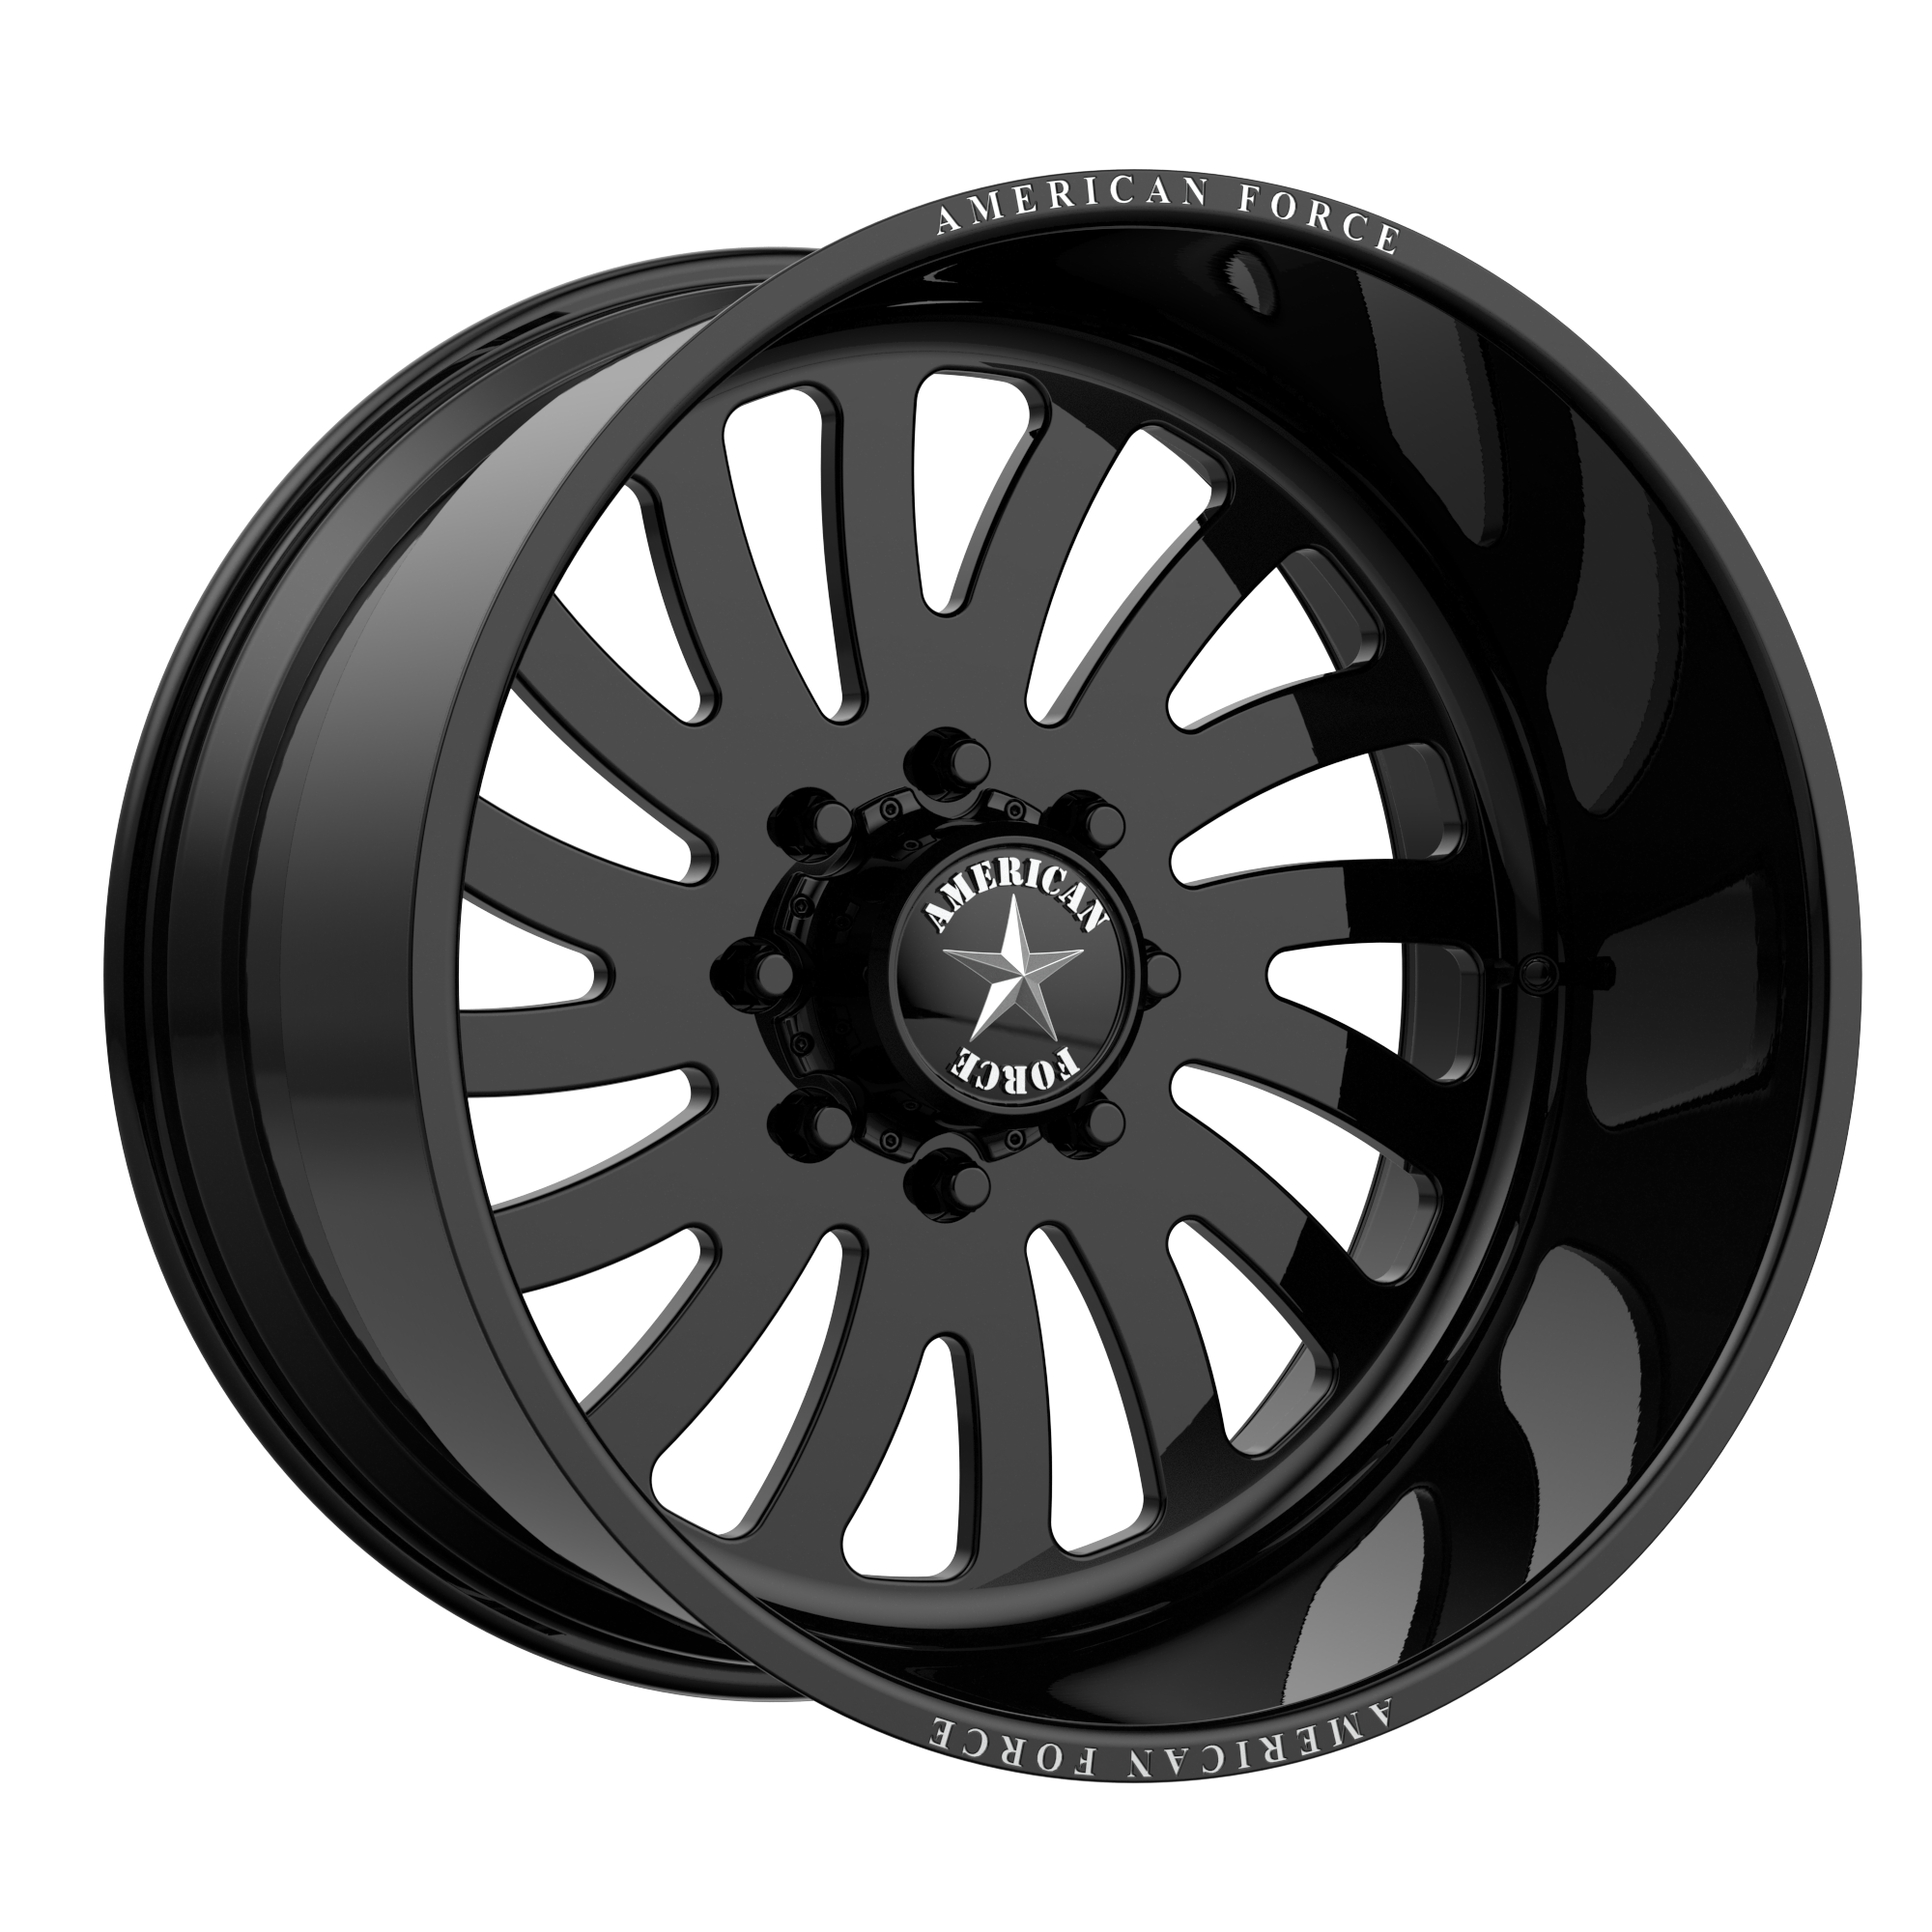 OCTANE SS 26x16 6x135.00 GLOSS BLACK MACHINED (-101 mm) - Tires and Engine Performance